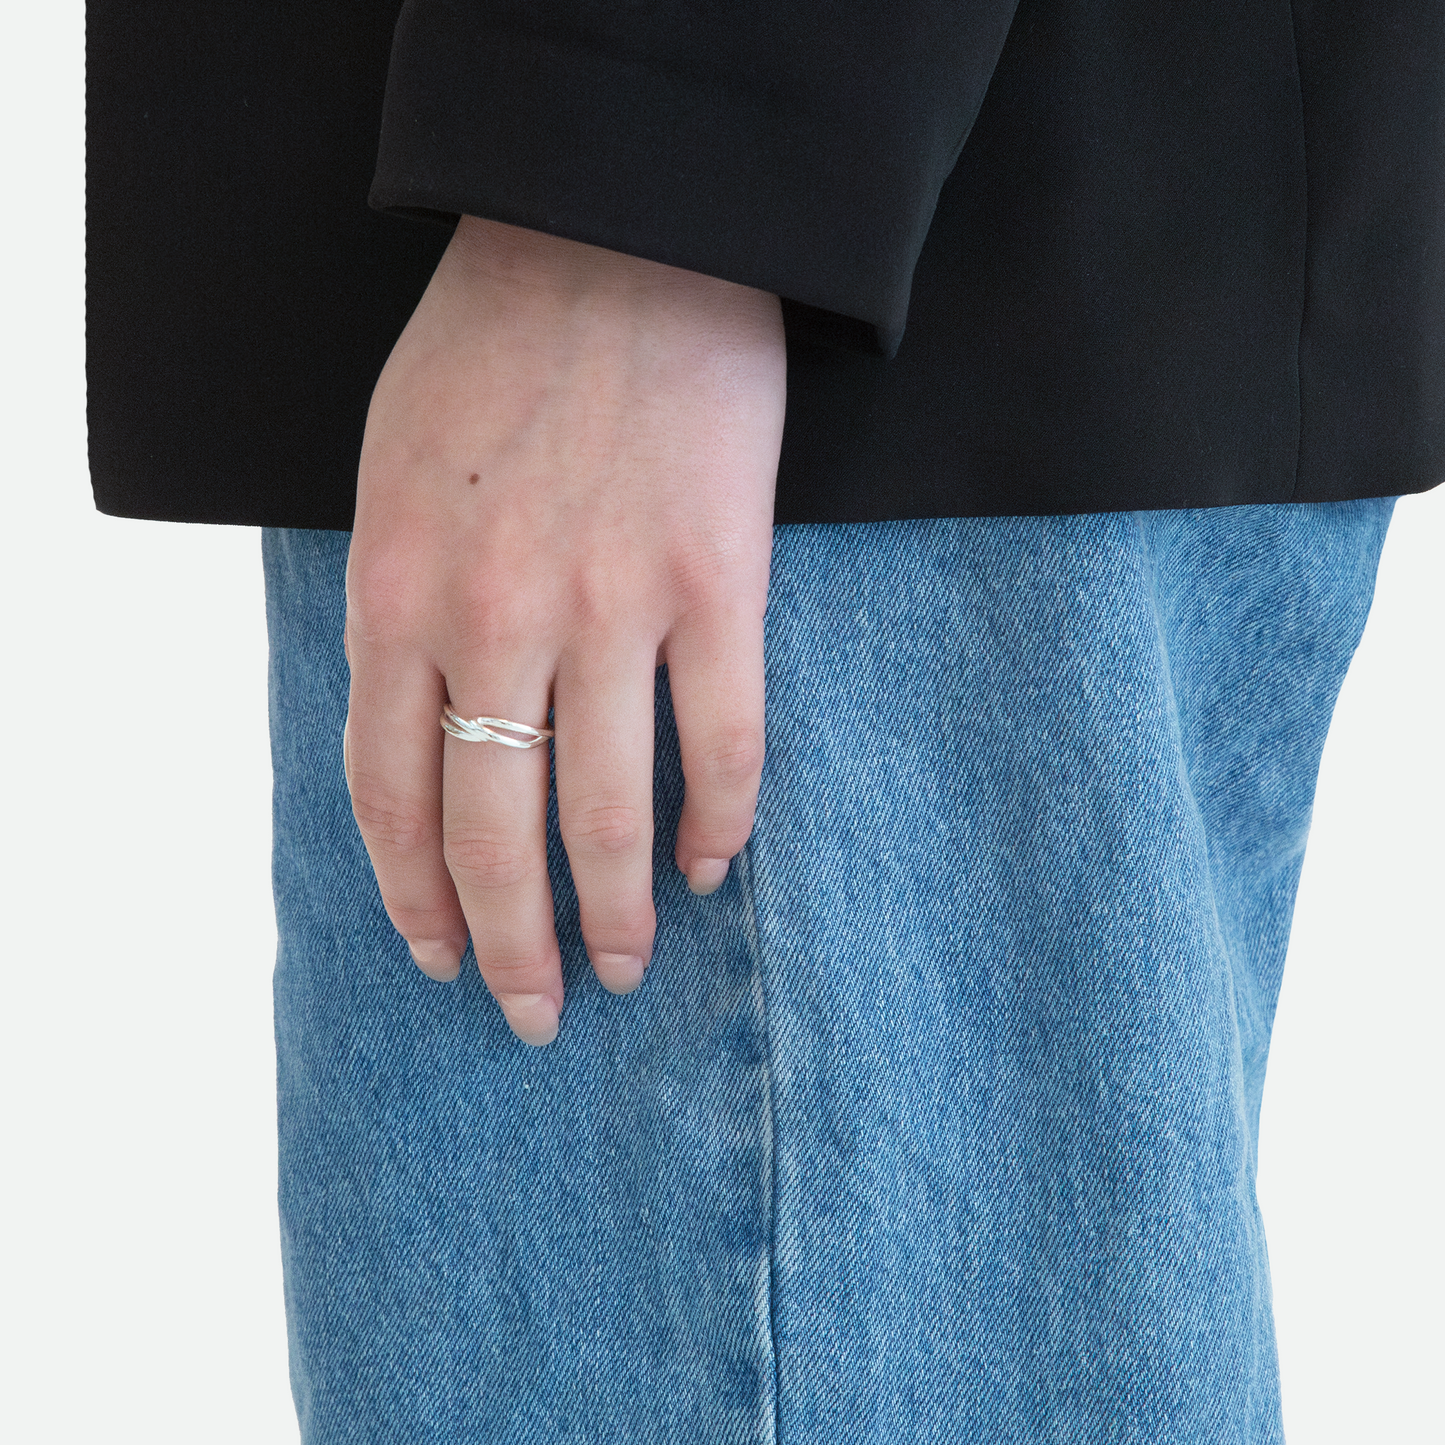 Side view of a model's hand wearing the Implico ring in silver, emphasizing the intertwined forms that touch at the center, designed by Ruggeri.